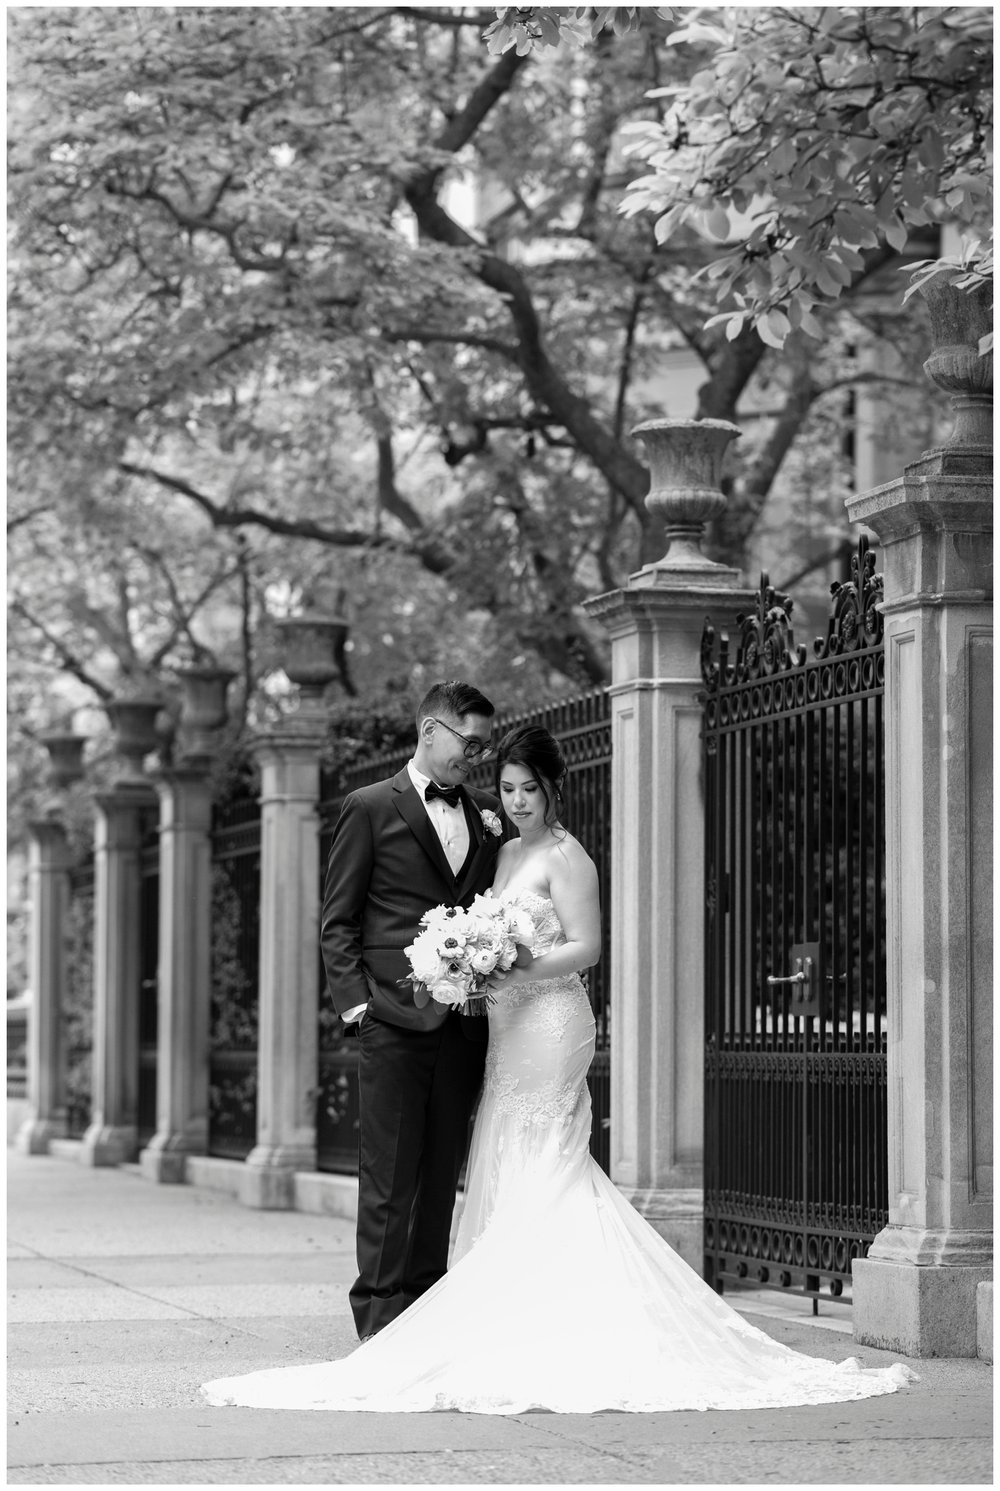 black and white image of bride and groom nuzzling